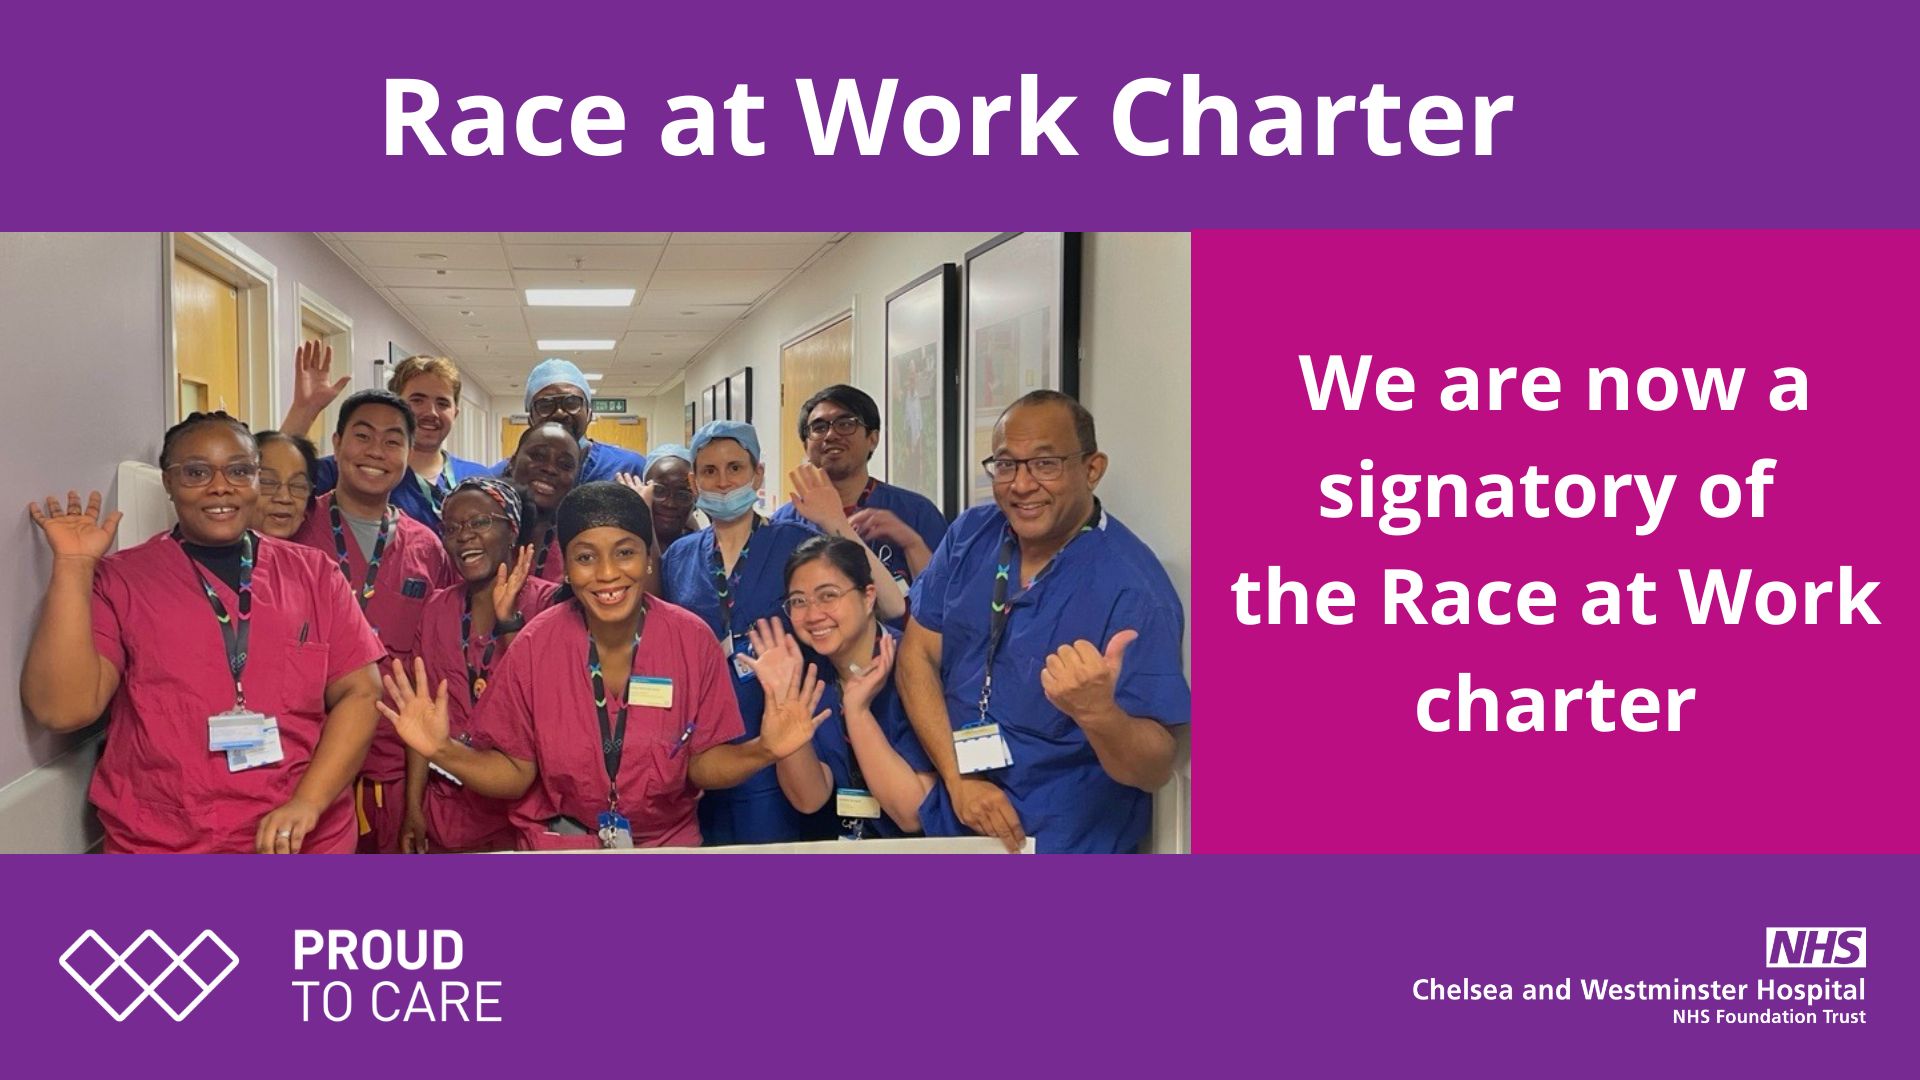 We are now a signatory of the Race at Work Charter